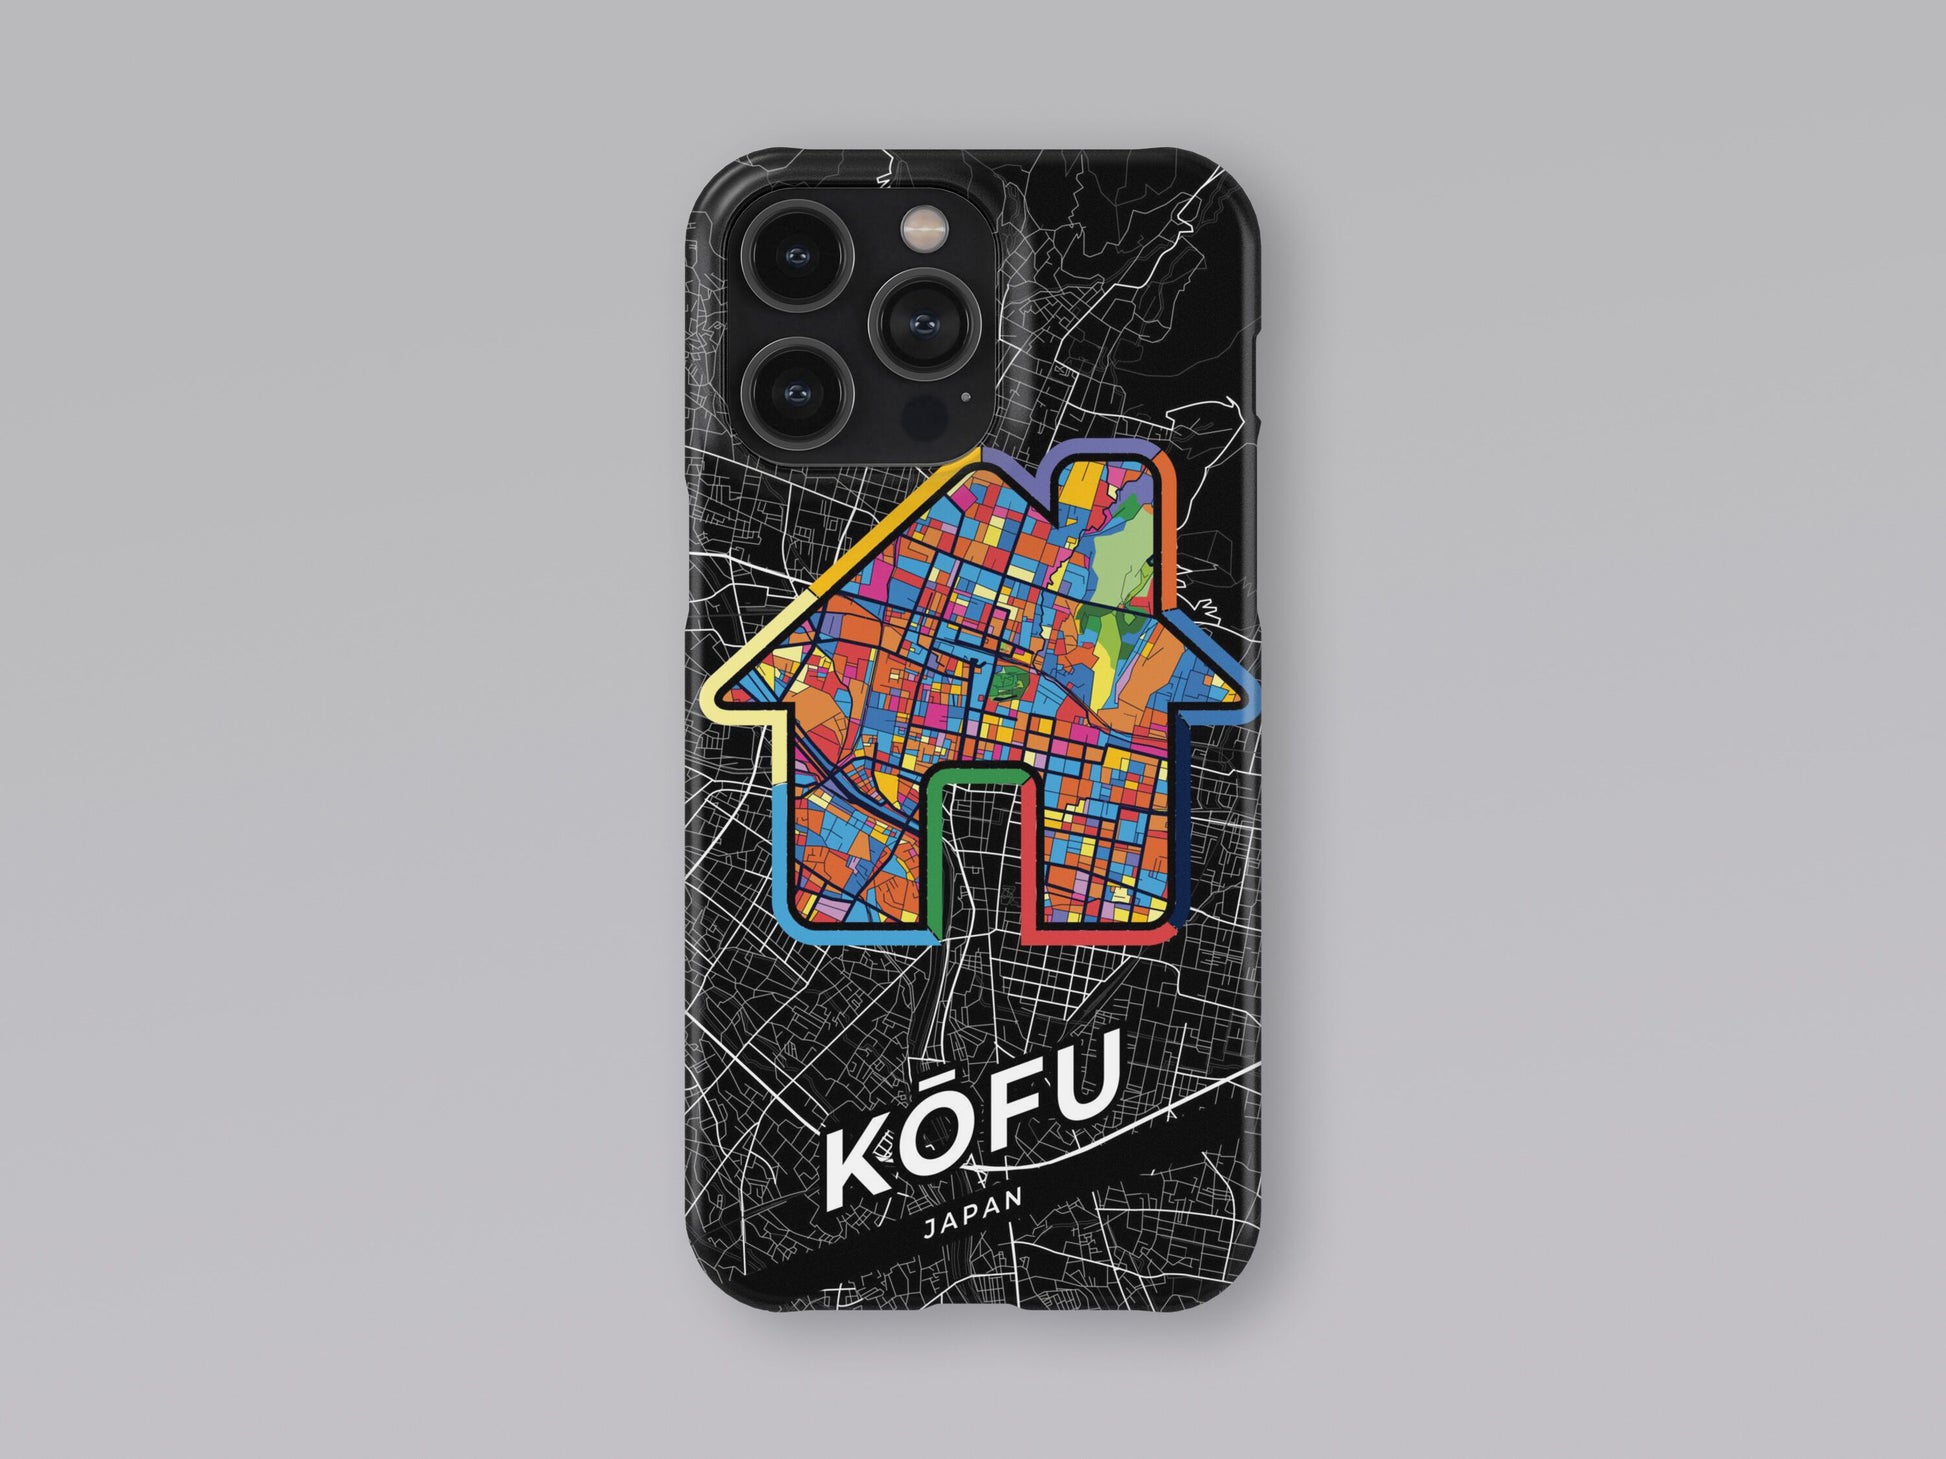 Kōfu Japan slim phone case with colorful icon. Birthday, wedding or housewarming gift. Couple match cases. 3